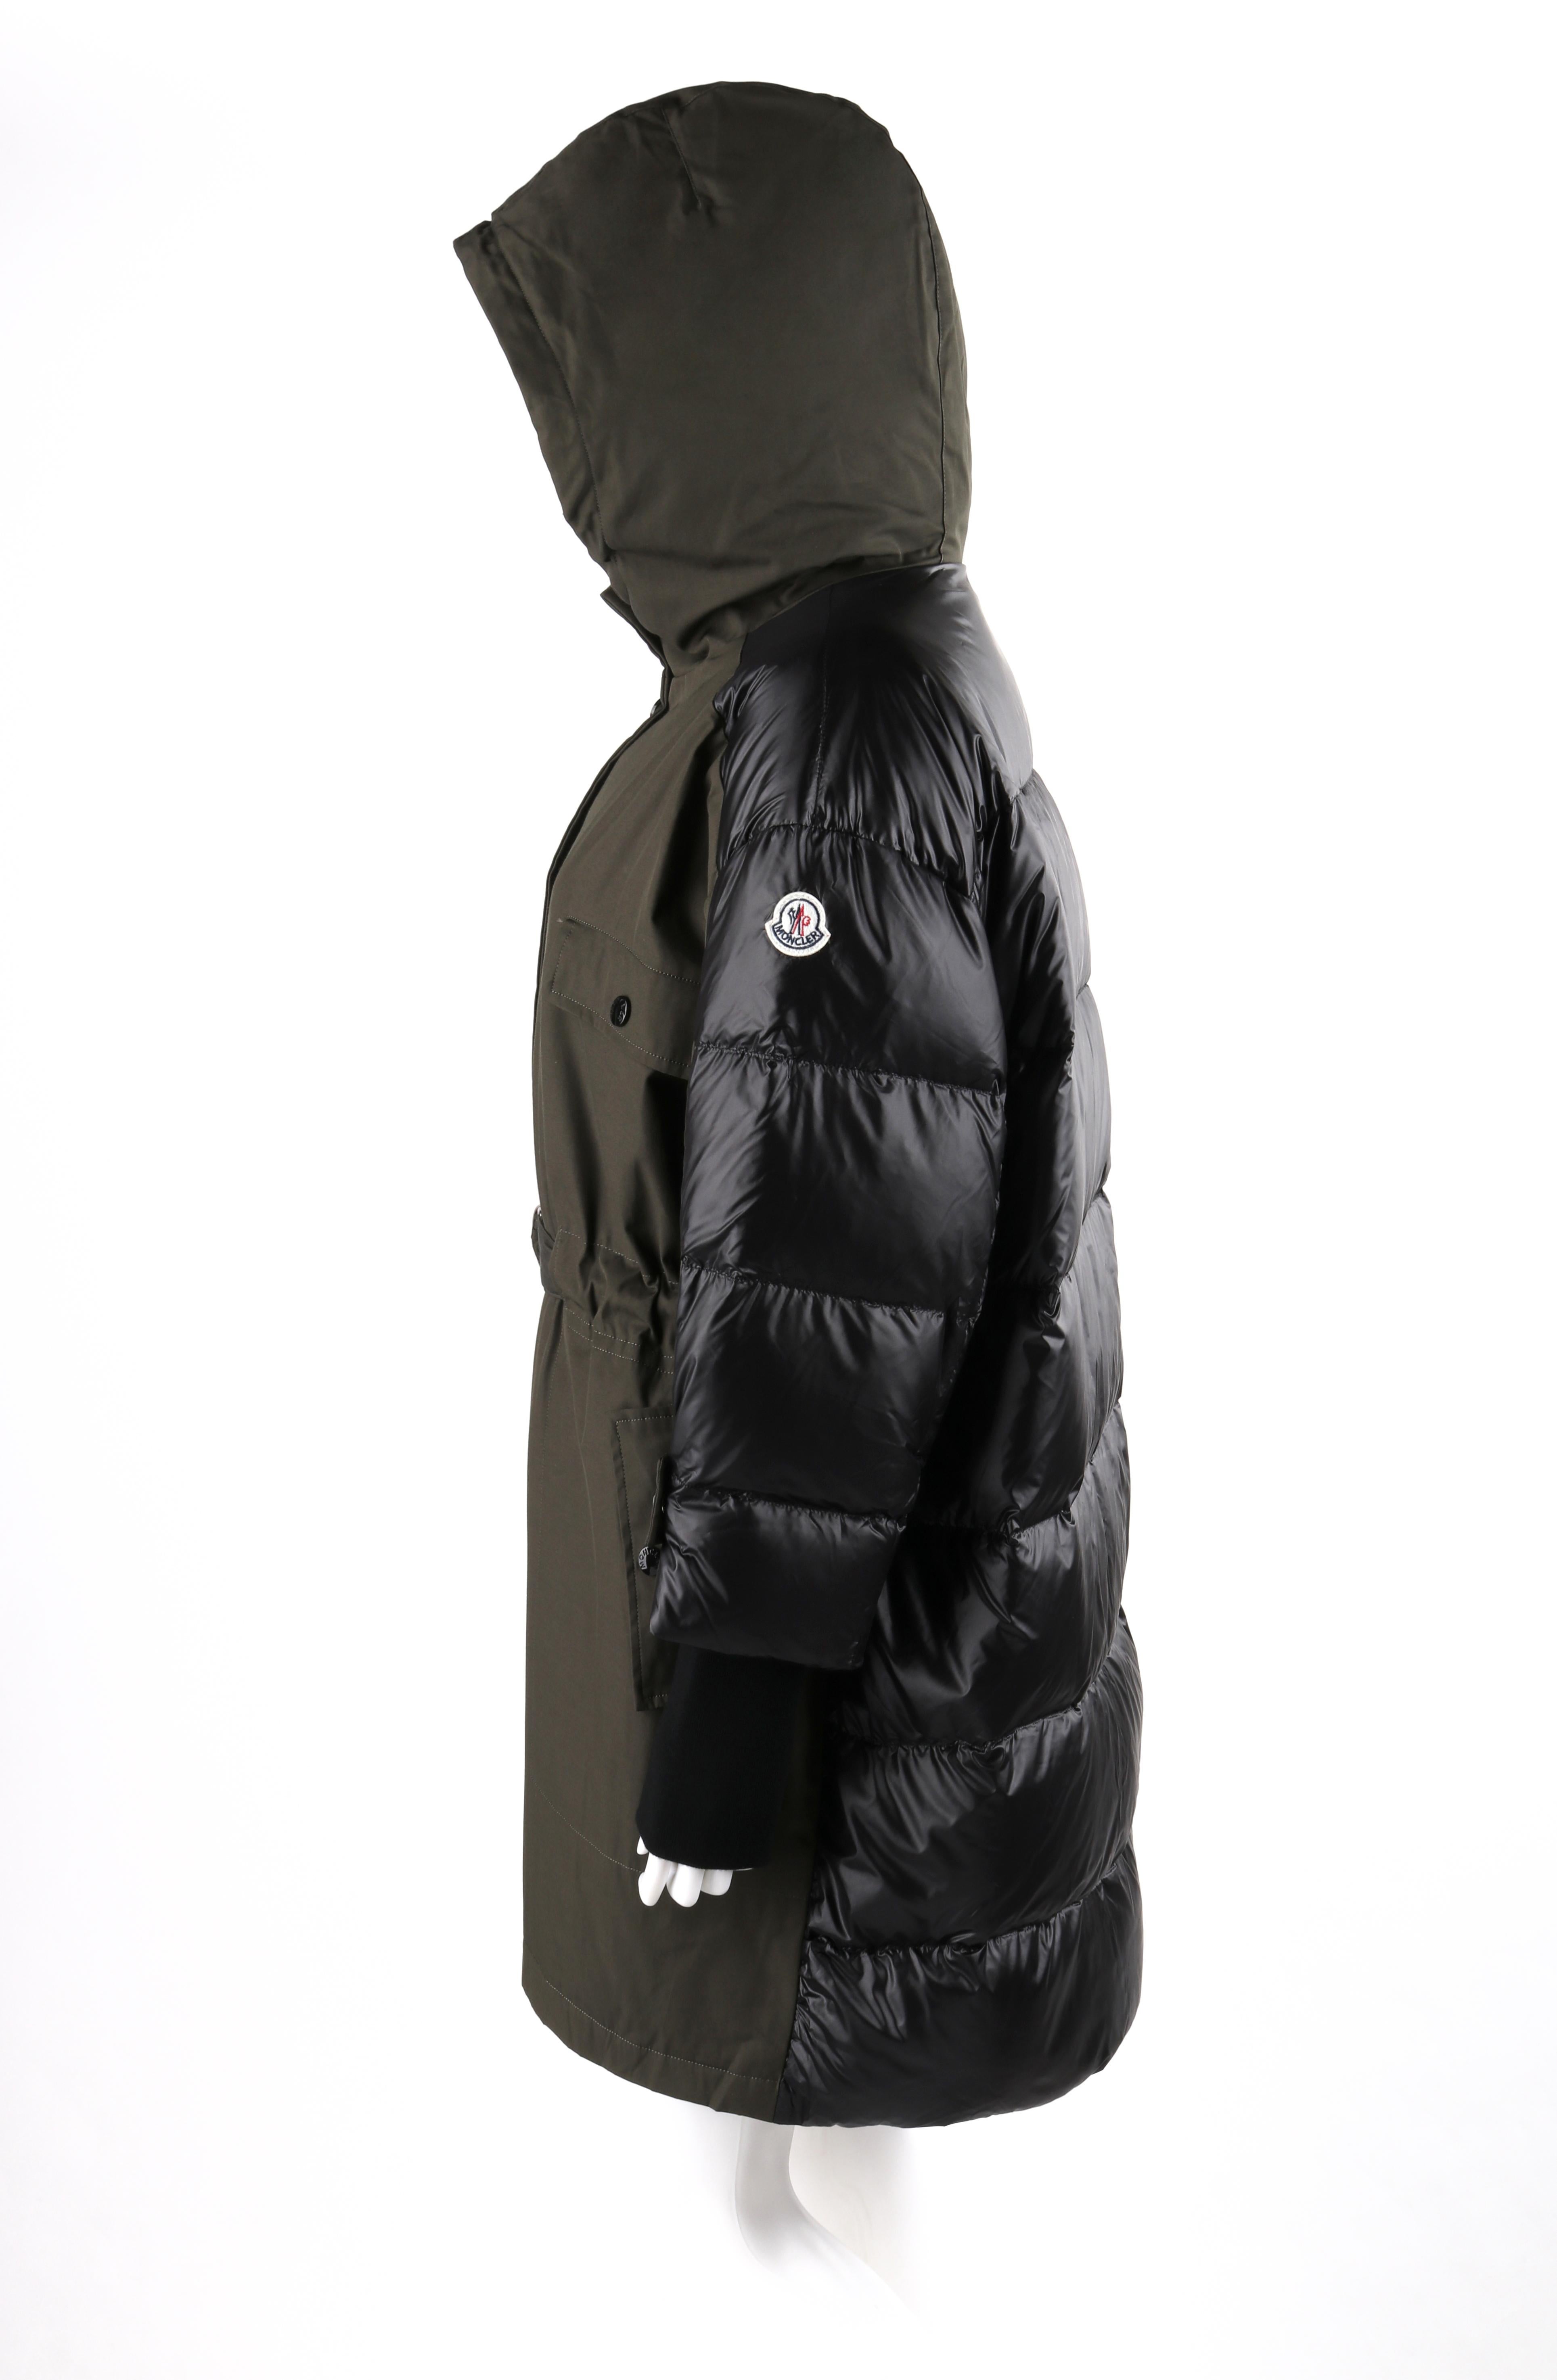 MONCLER F/W 2018 “Ocean Giubbotto” Olive Black Puffer Layer Belted Hooded Jacket For Sale 2